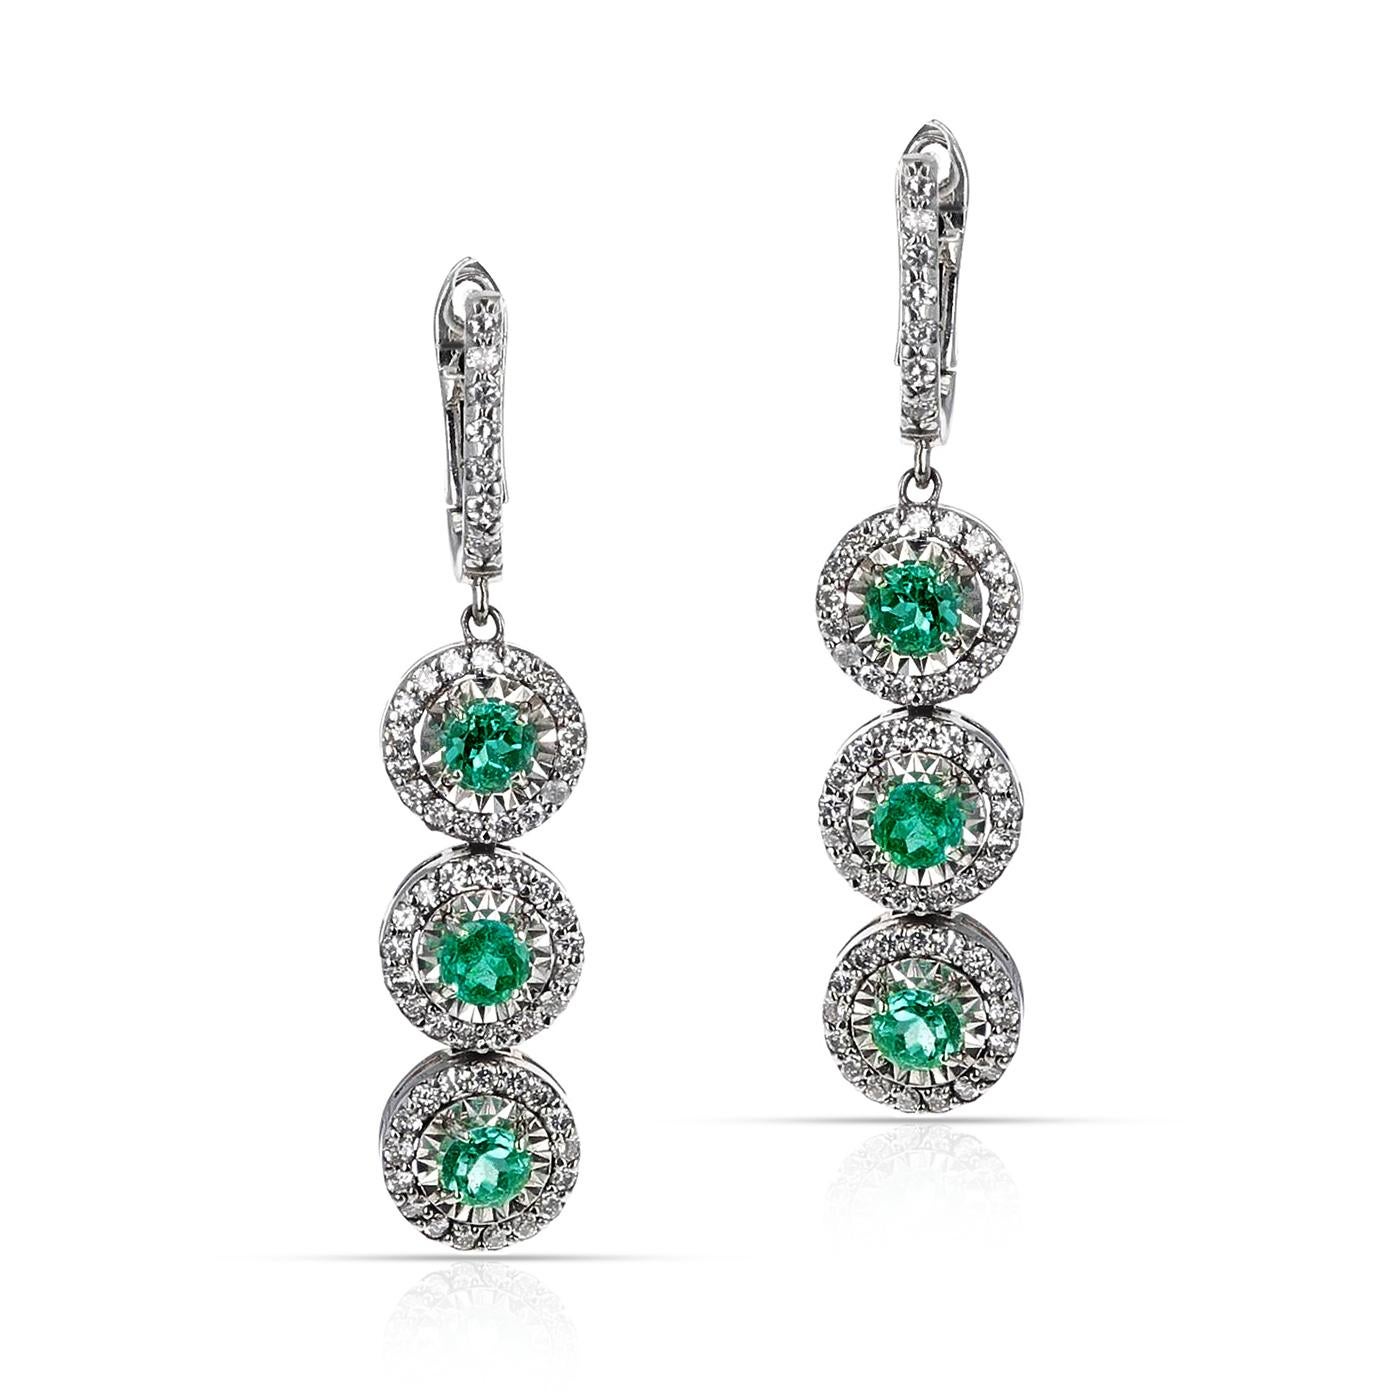 Round Emerald and 1.25 Ct. Diamond Dangling Earrings, 14K Gold In Excellent Condition For Sale In New York, NY